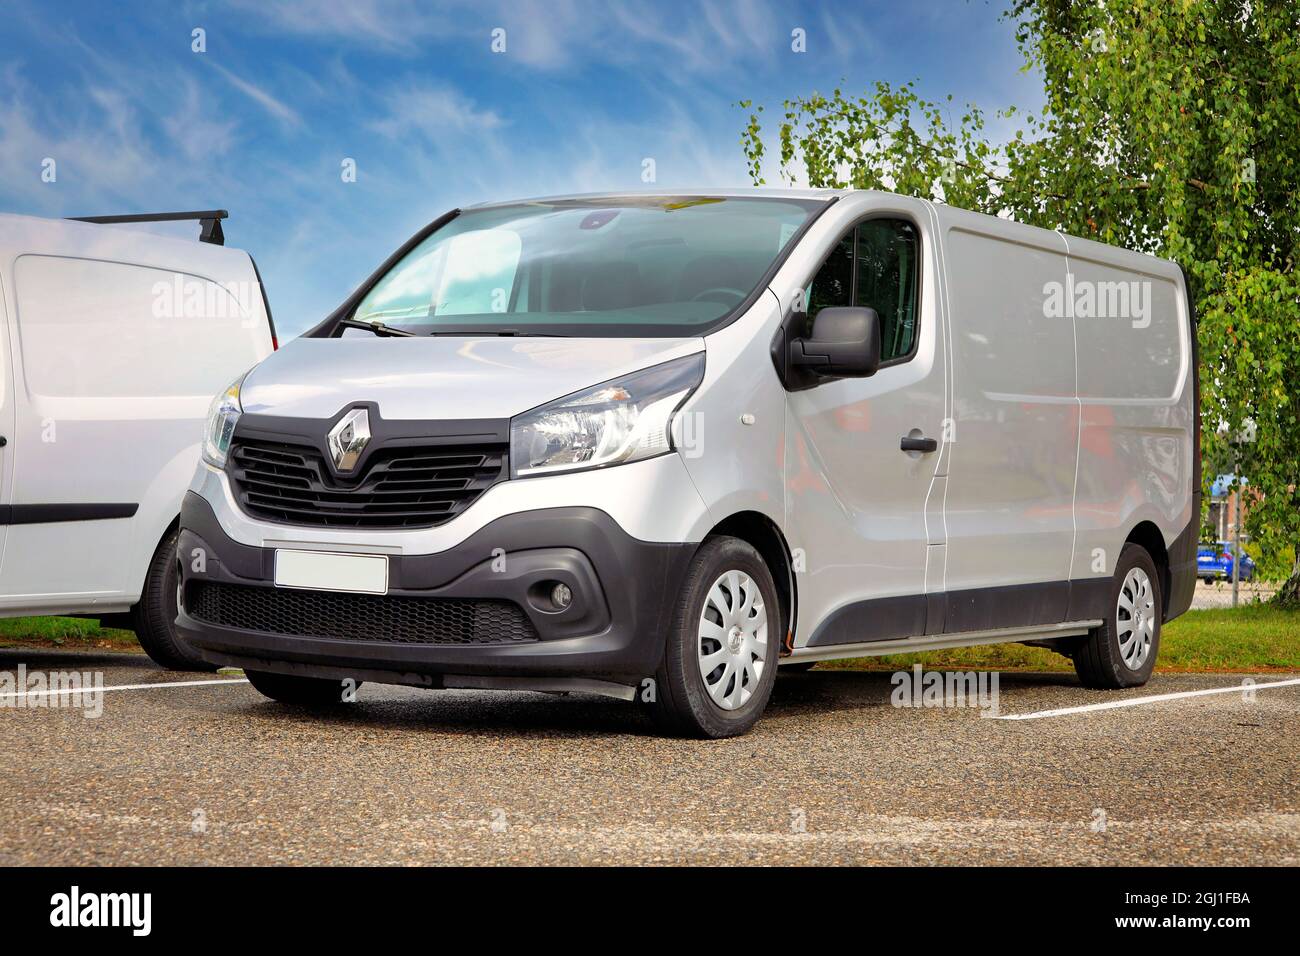 New Renault Trafic Passenger more 'car-like' then ever, renault trafic